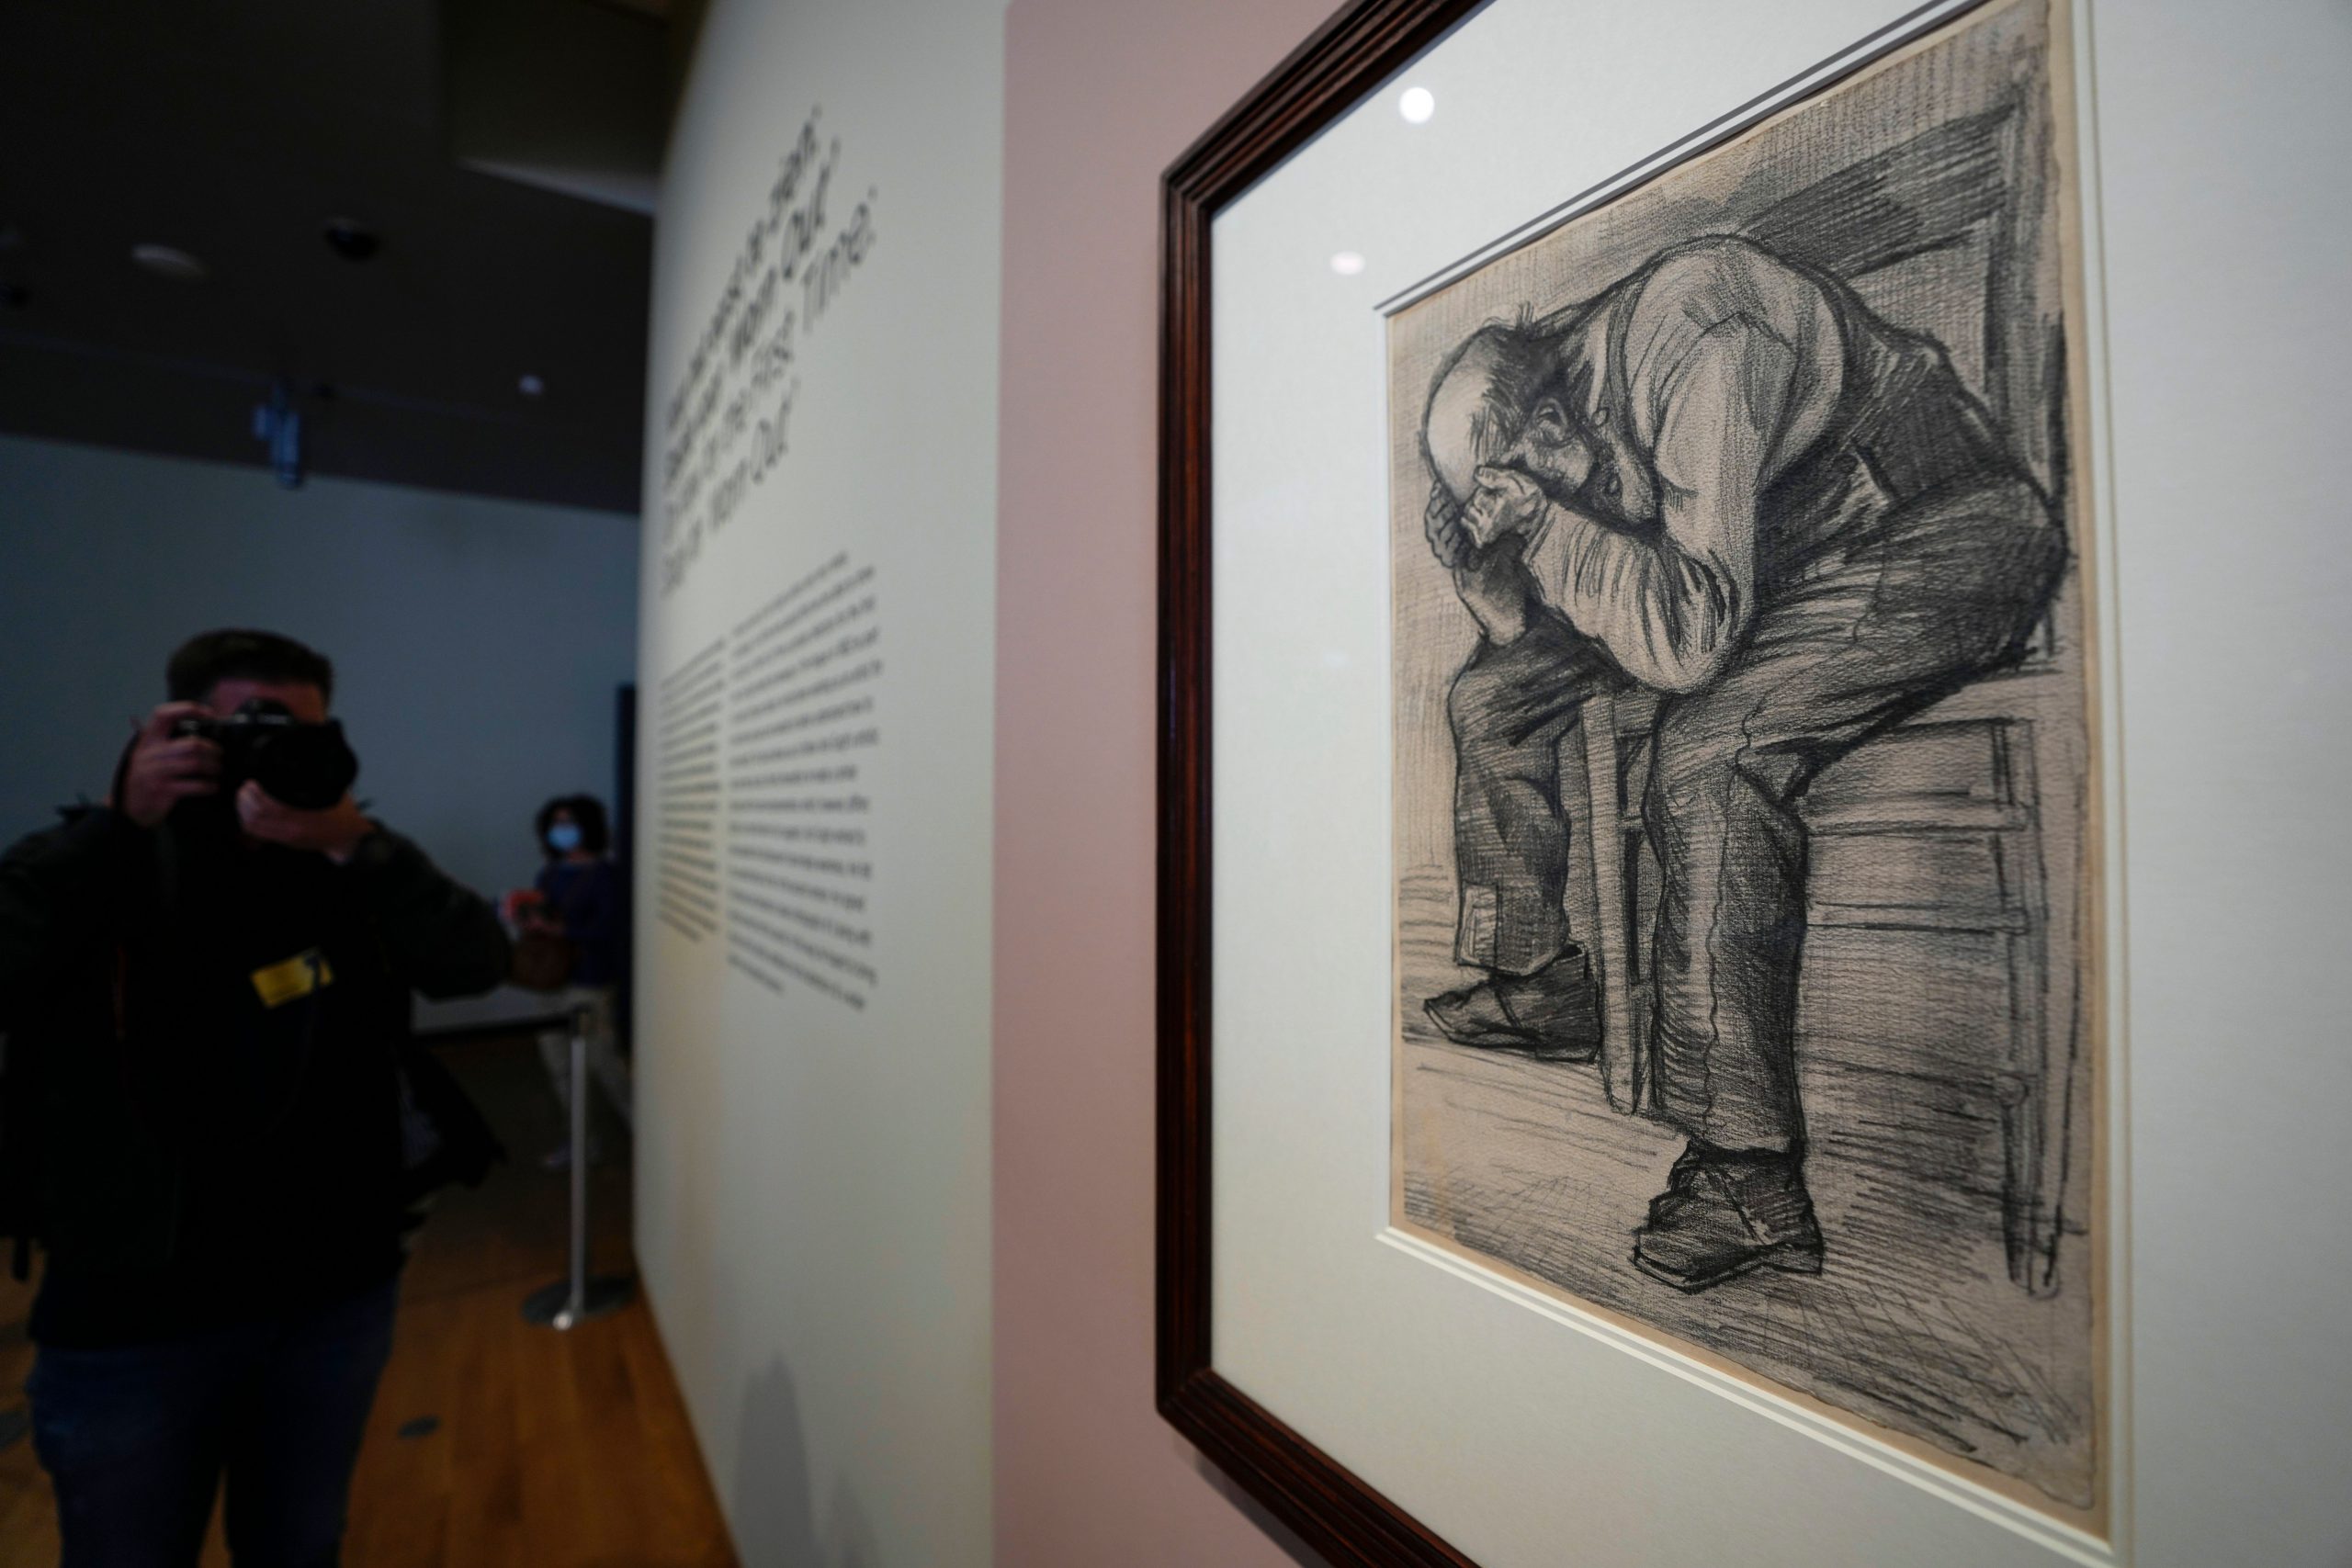 Newly discovered Vincent Van Gogh drawing to go on display in Amsterdam museum